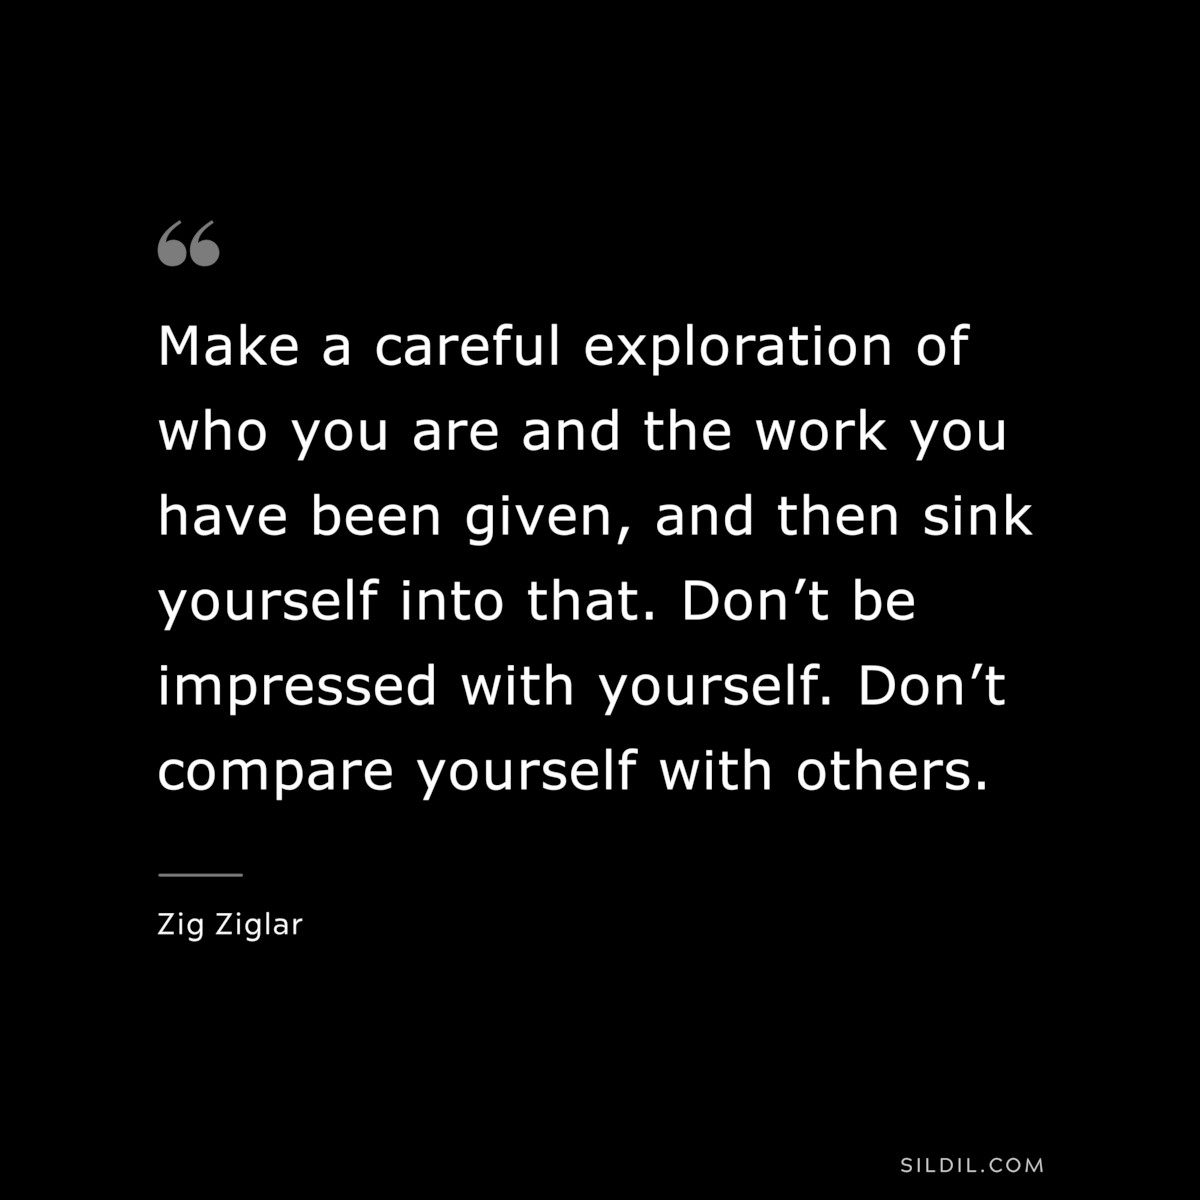 Make a careful exploration of who you are and the work you have been given, and then sink yourself into that. Don’t be impressed with yourself. Don’t compare yourself with others. ― Zig Ziglar